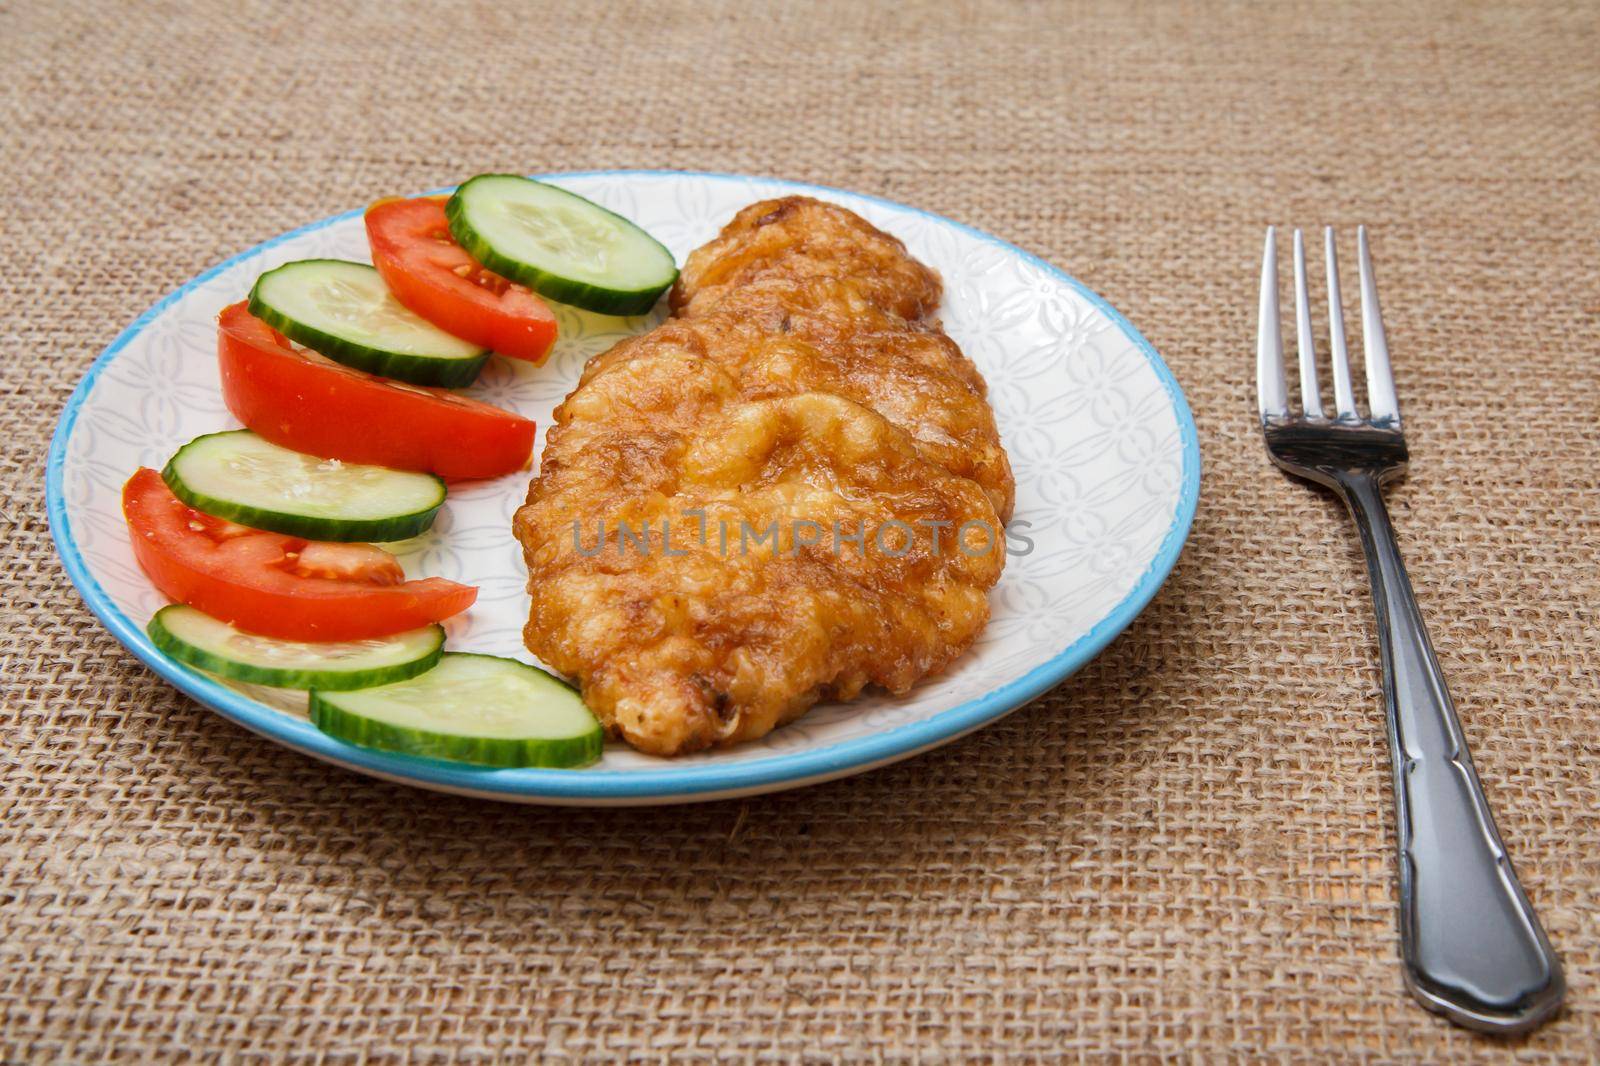 Plate with fried meat chop in batter and sliced tomato and cucumber with fork on sackcloth